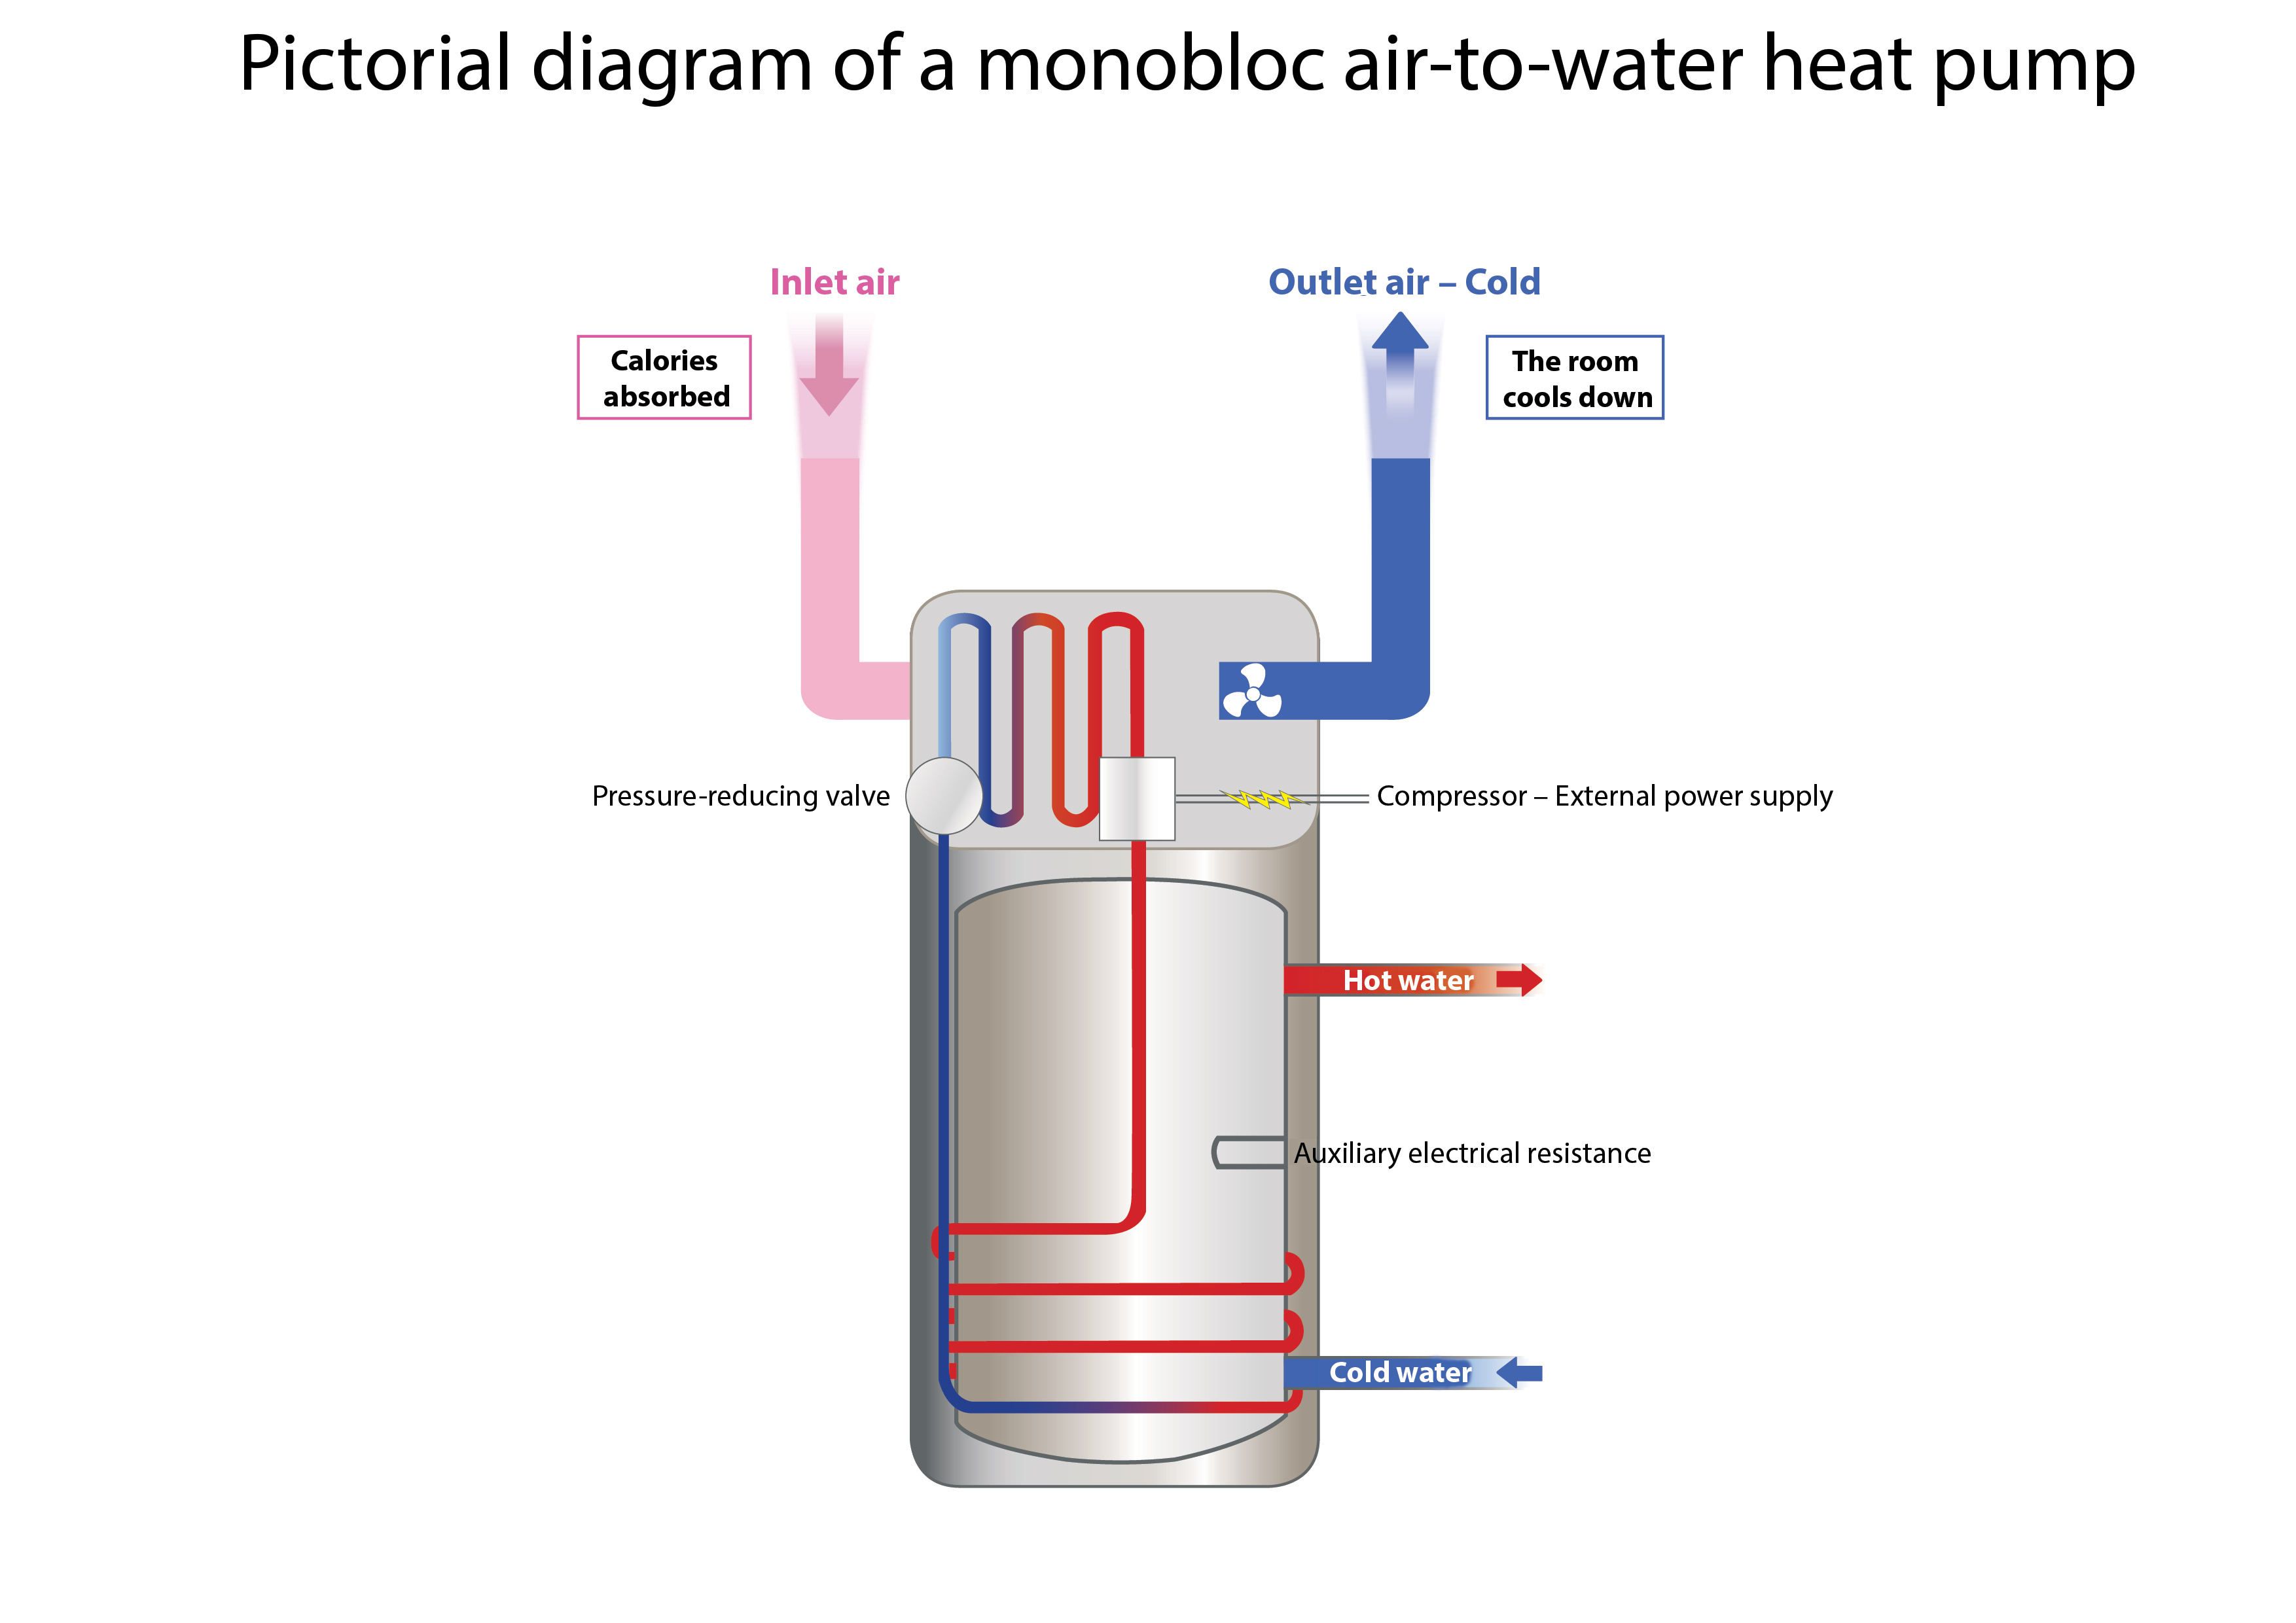 Pictorial diagram of a monobloc air-to-water heat pump